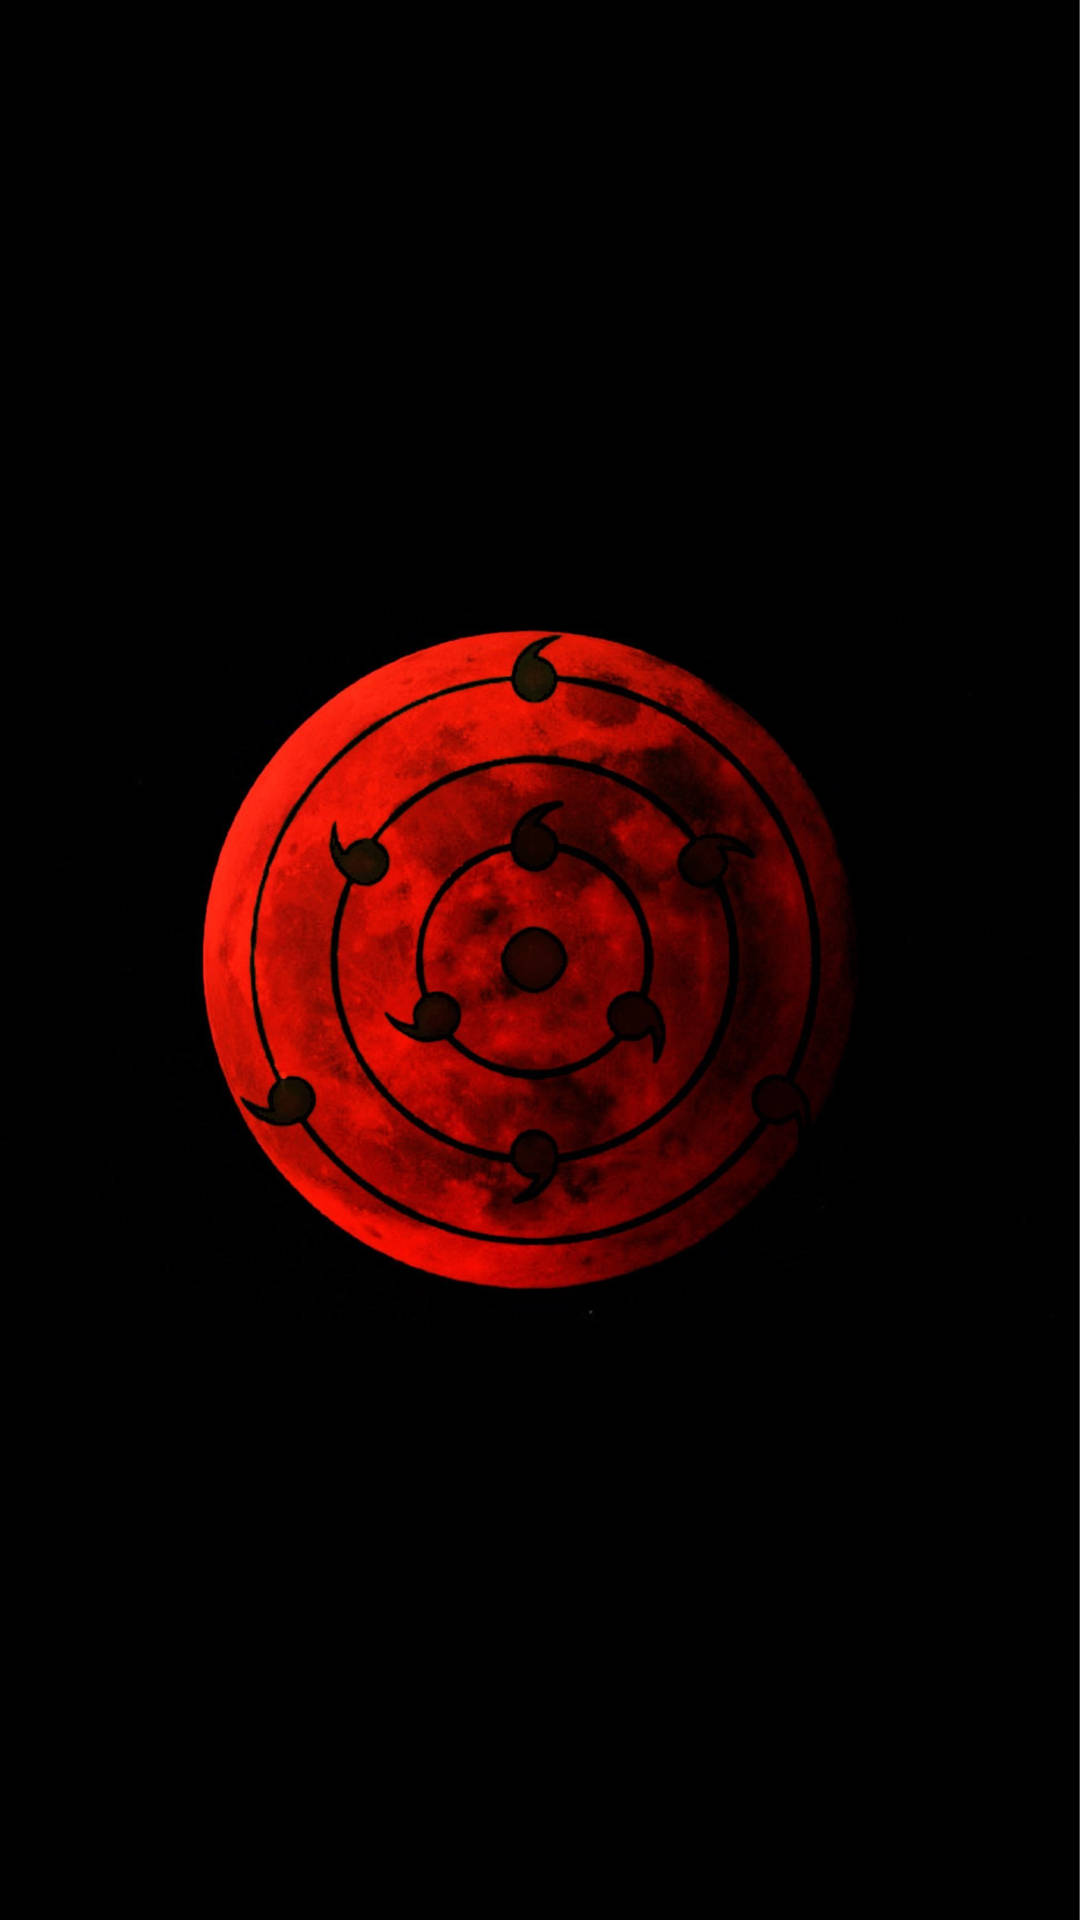 Tsukuyomi Power In Red Moon Background